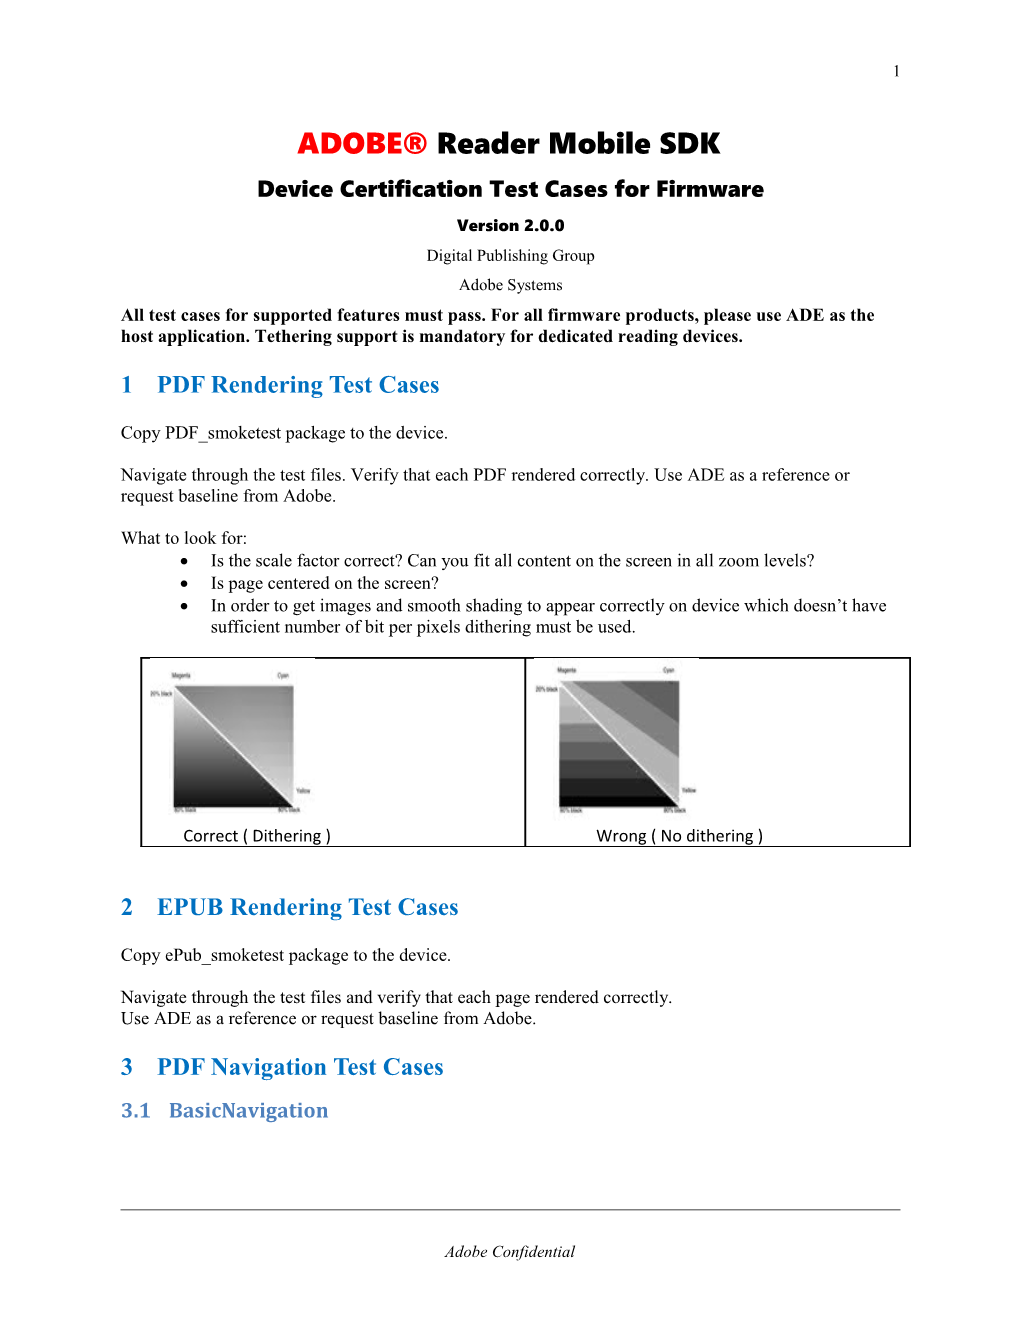 Device Certification Test Cases for Firmware